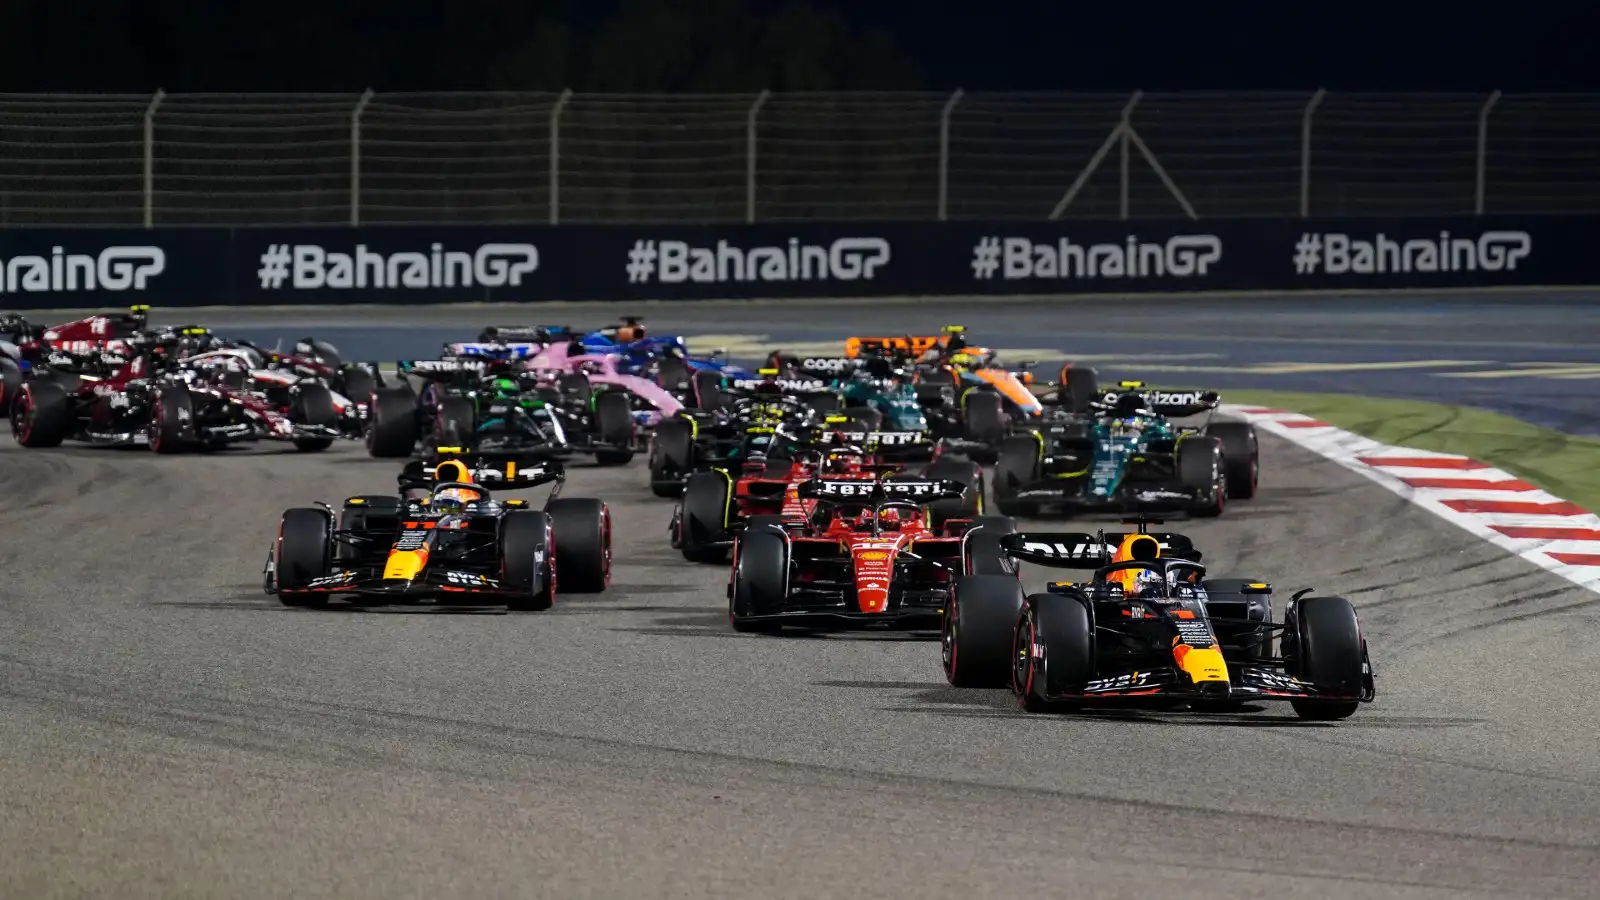 Max Verstappen leads at the start of the 2023 Bahrain Grand Prix. Sakhir, March 2023. Budget cap.